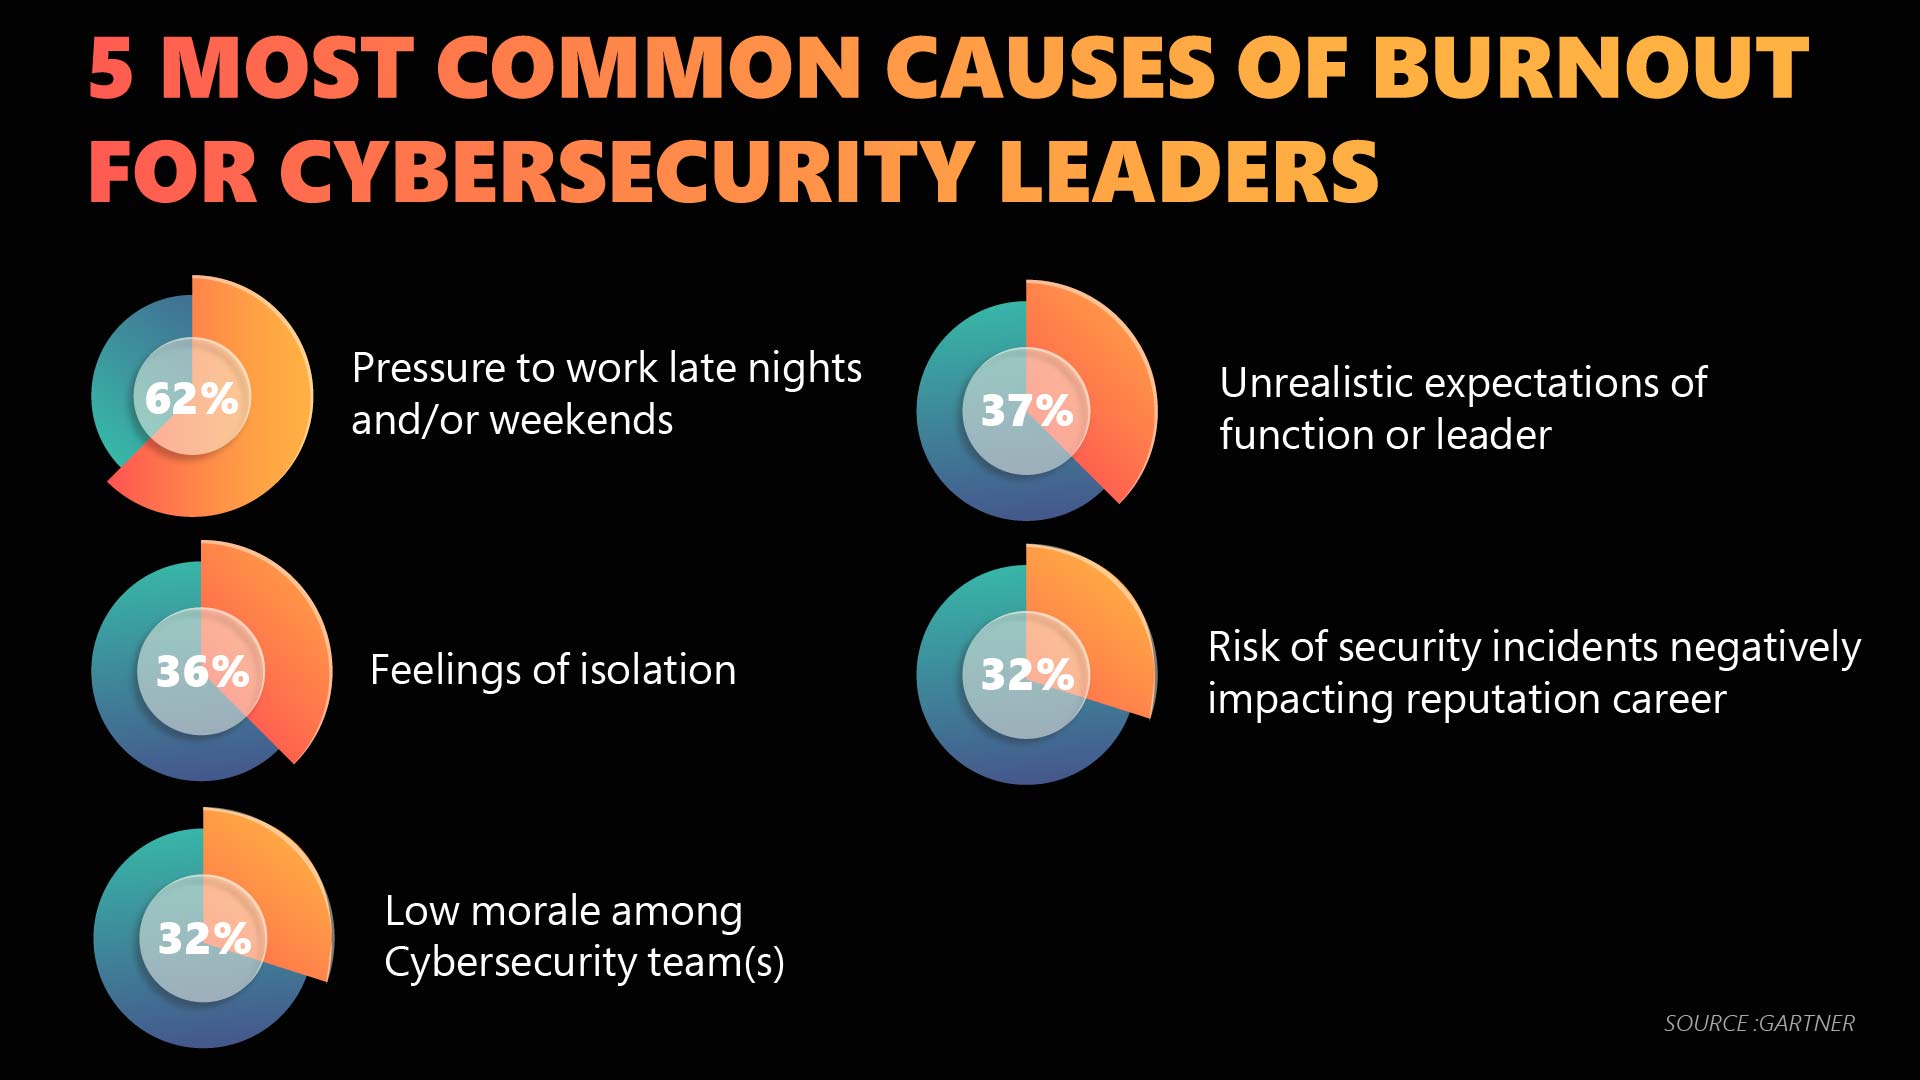 Burnout of Cybersecurity Leaders